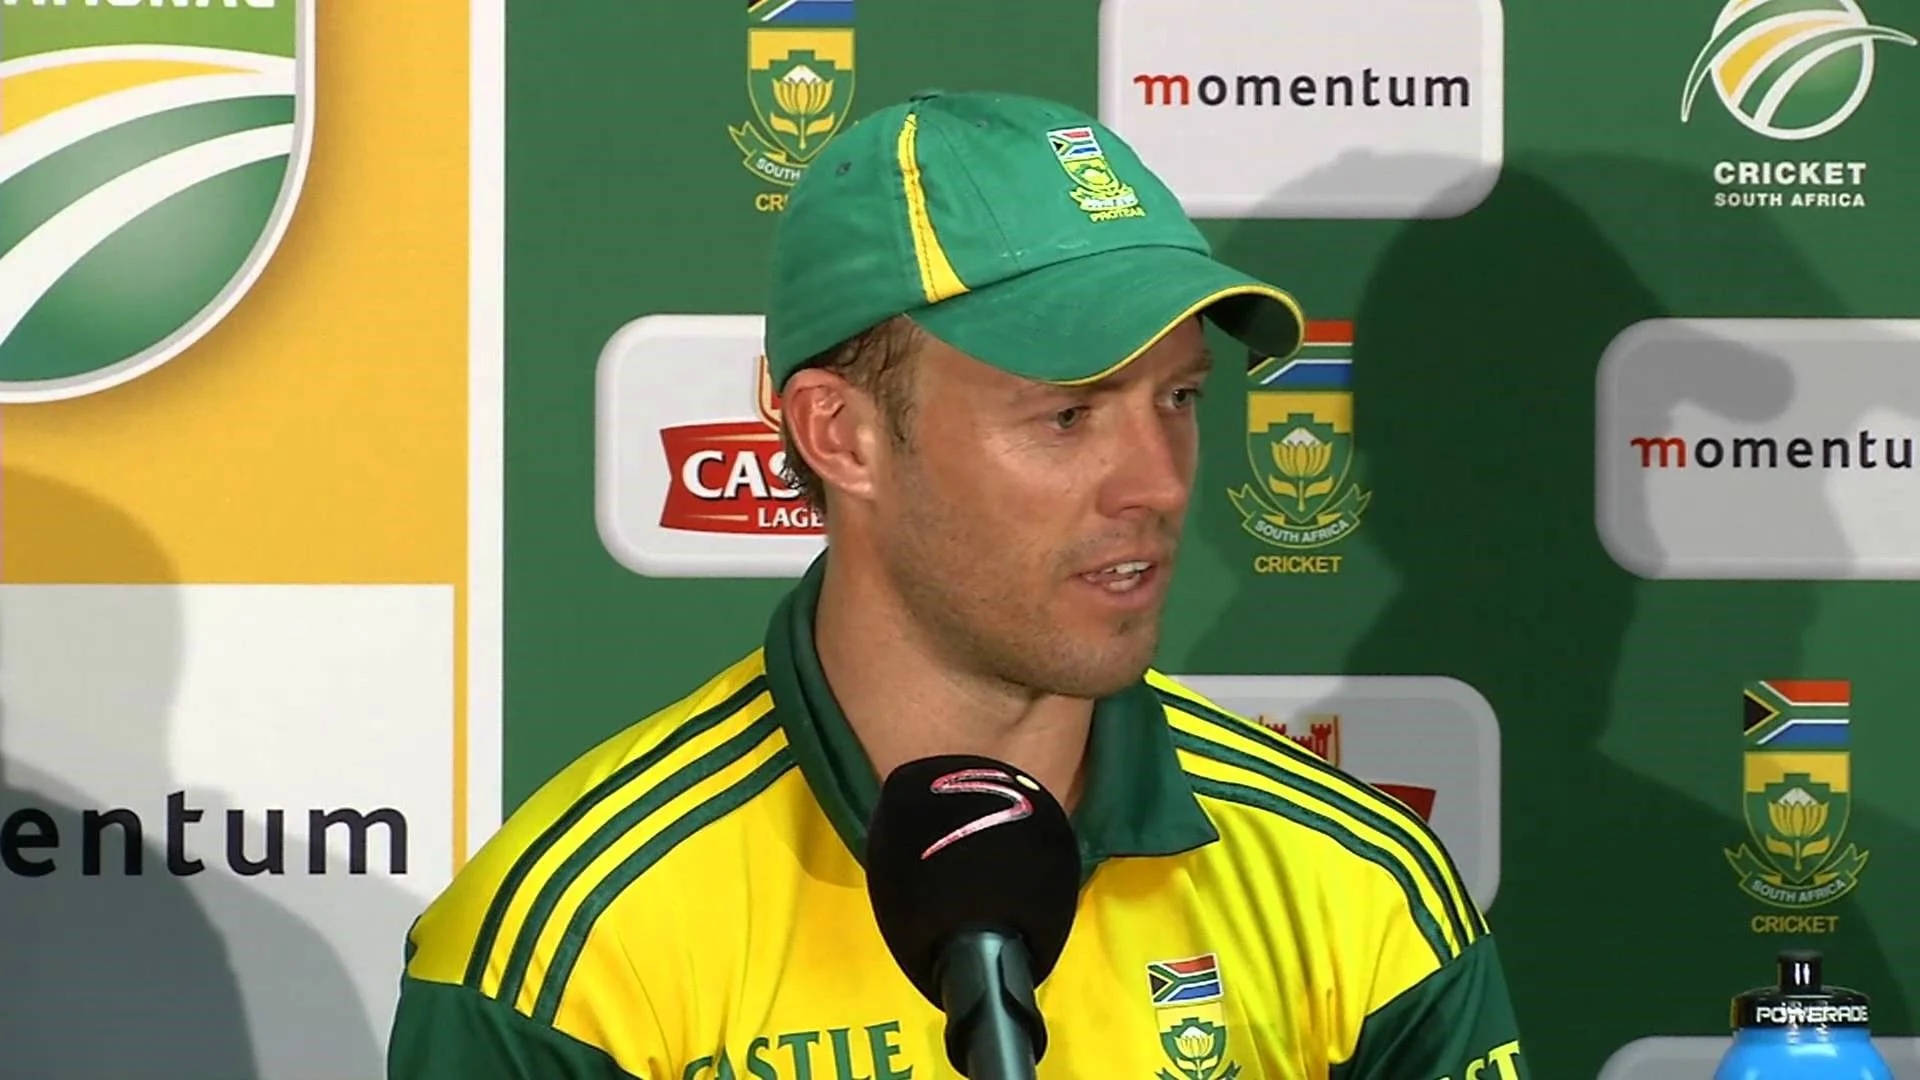 South Africa Cricket Post-game Interview Background